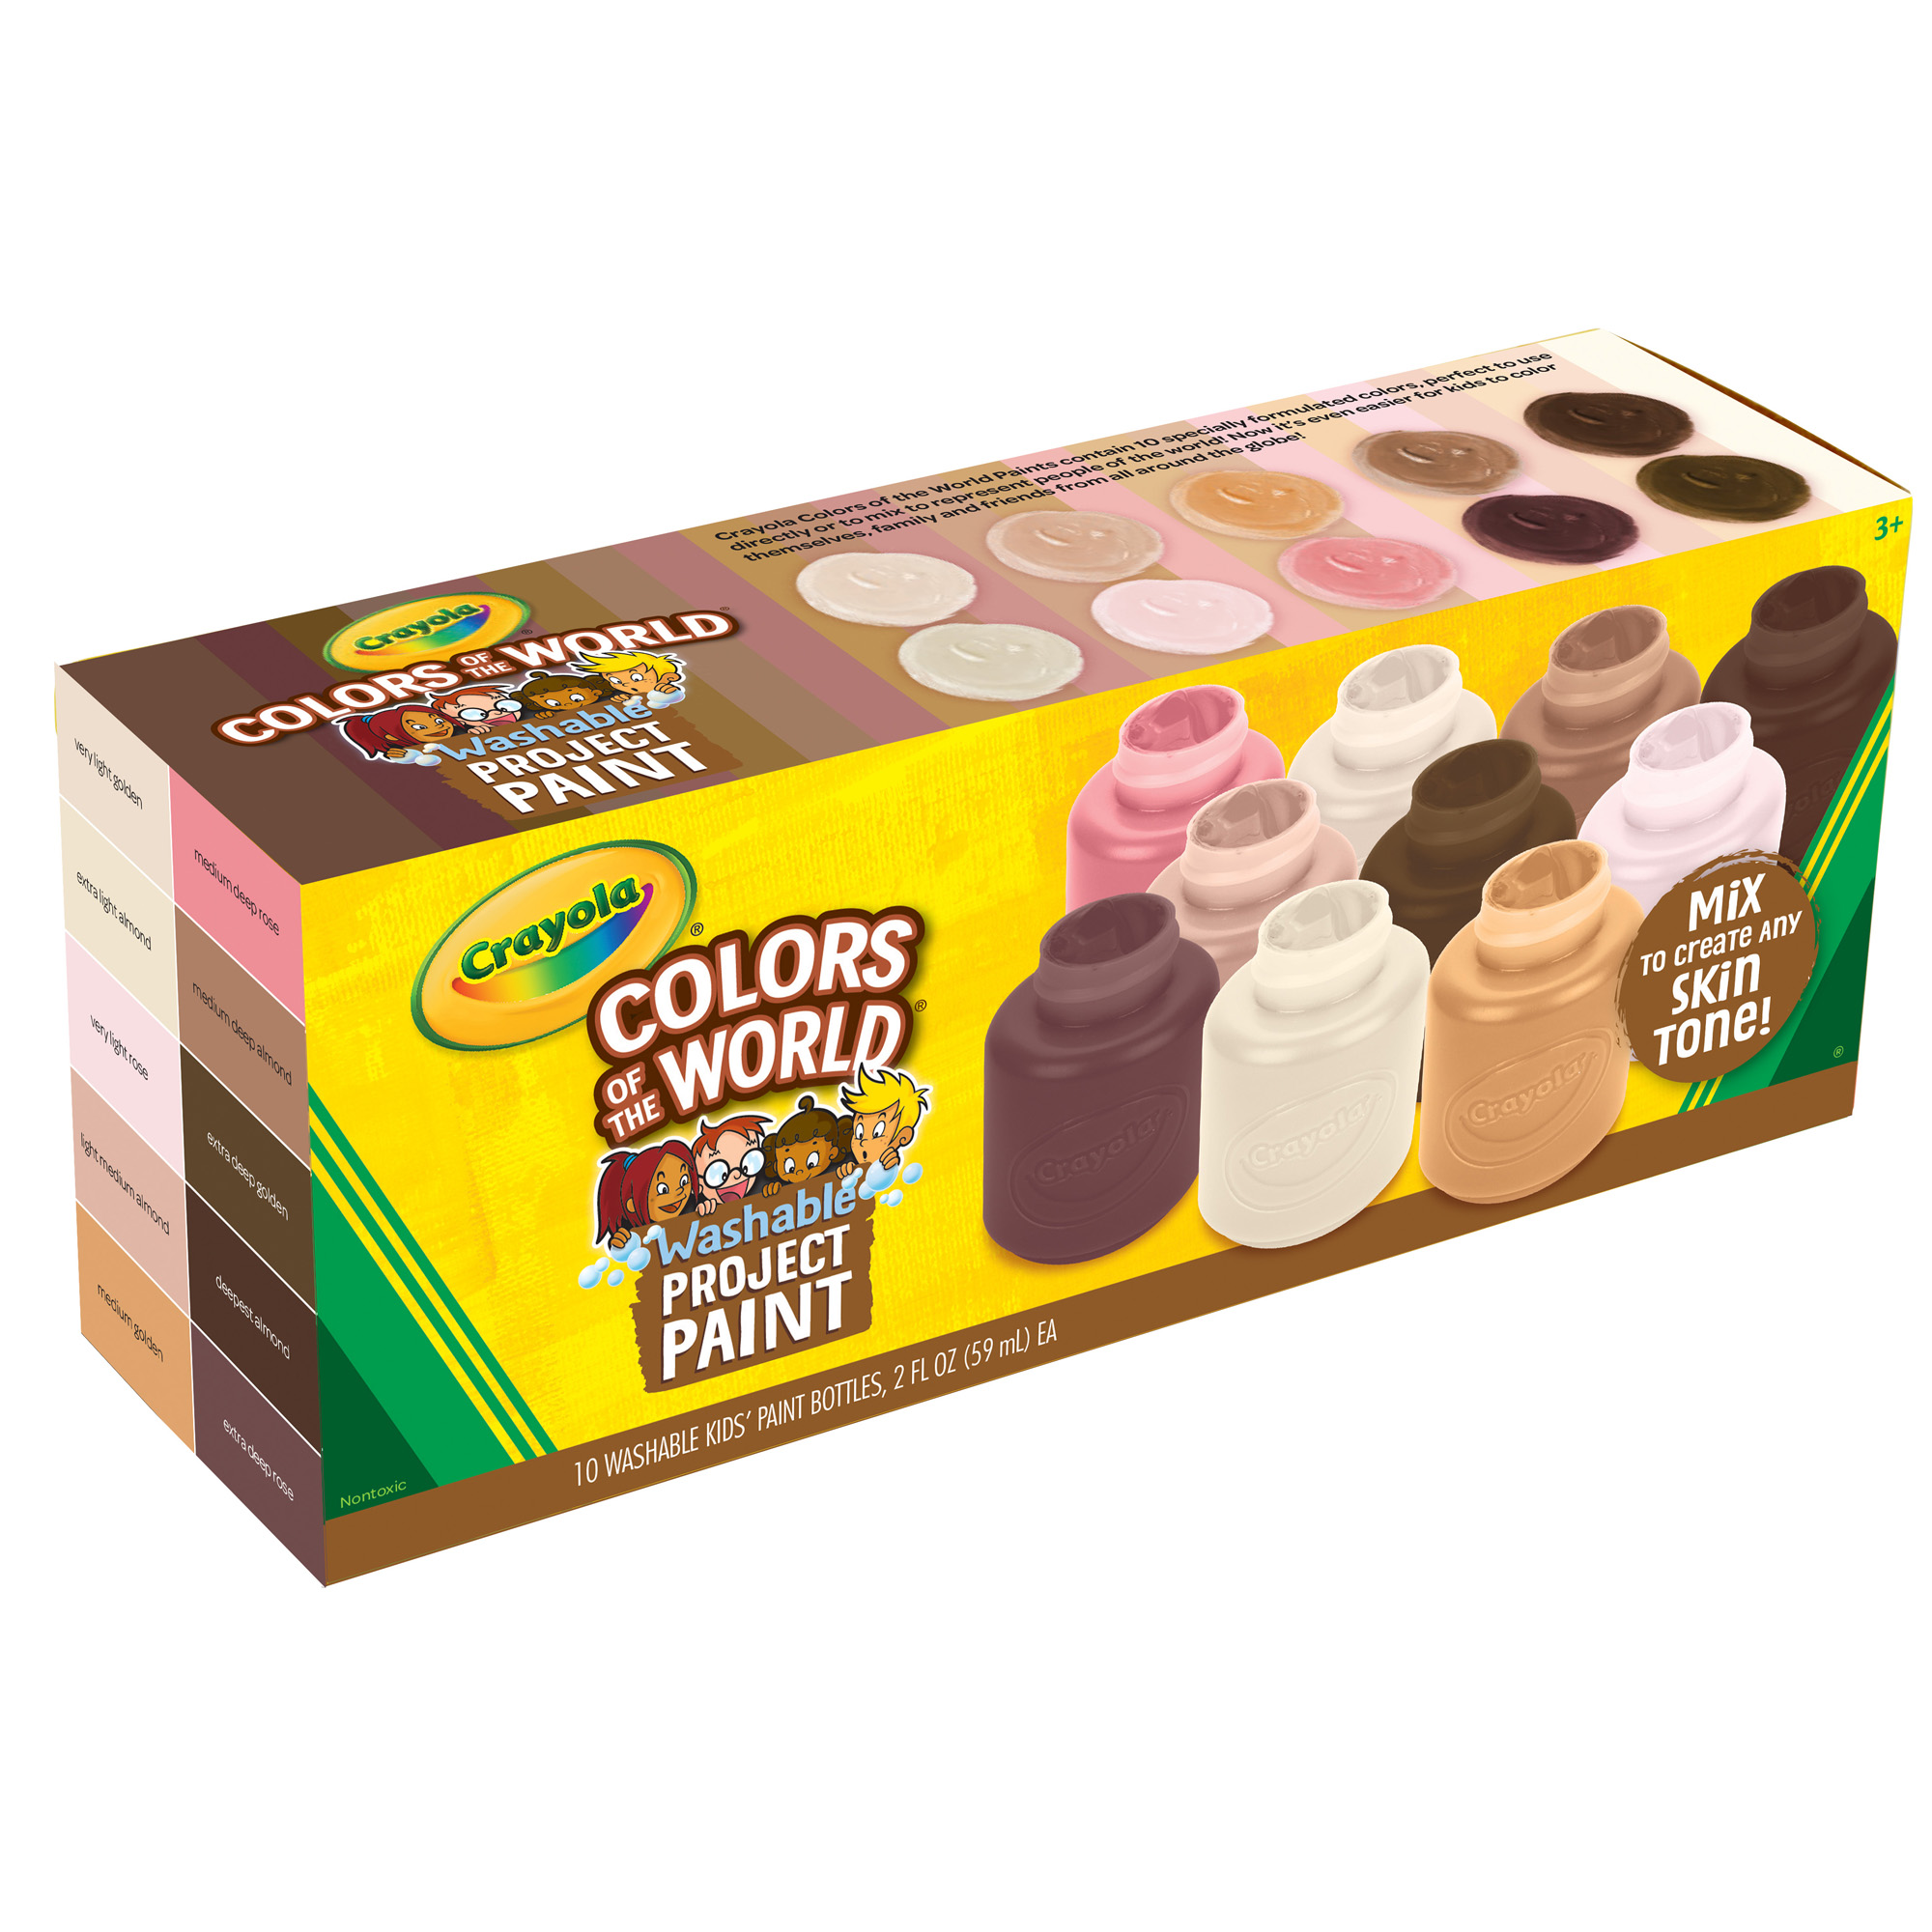 Colors of the World Project Paint, 2oz Jars, 10 Count - BIN542315, Crayola  Llc